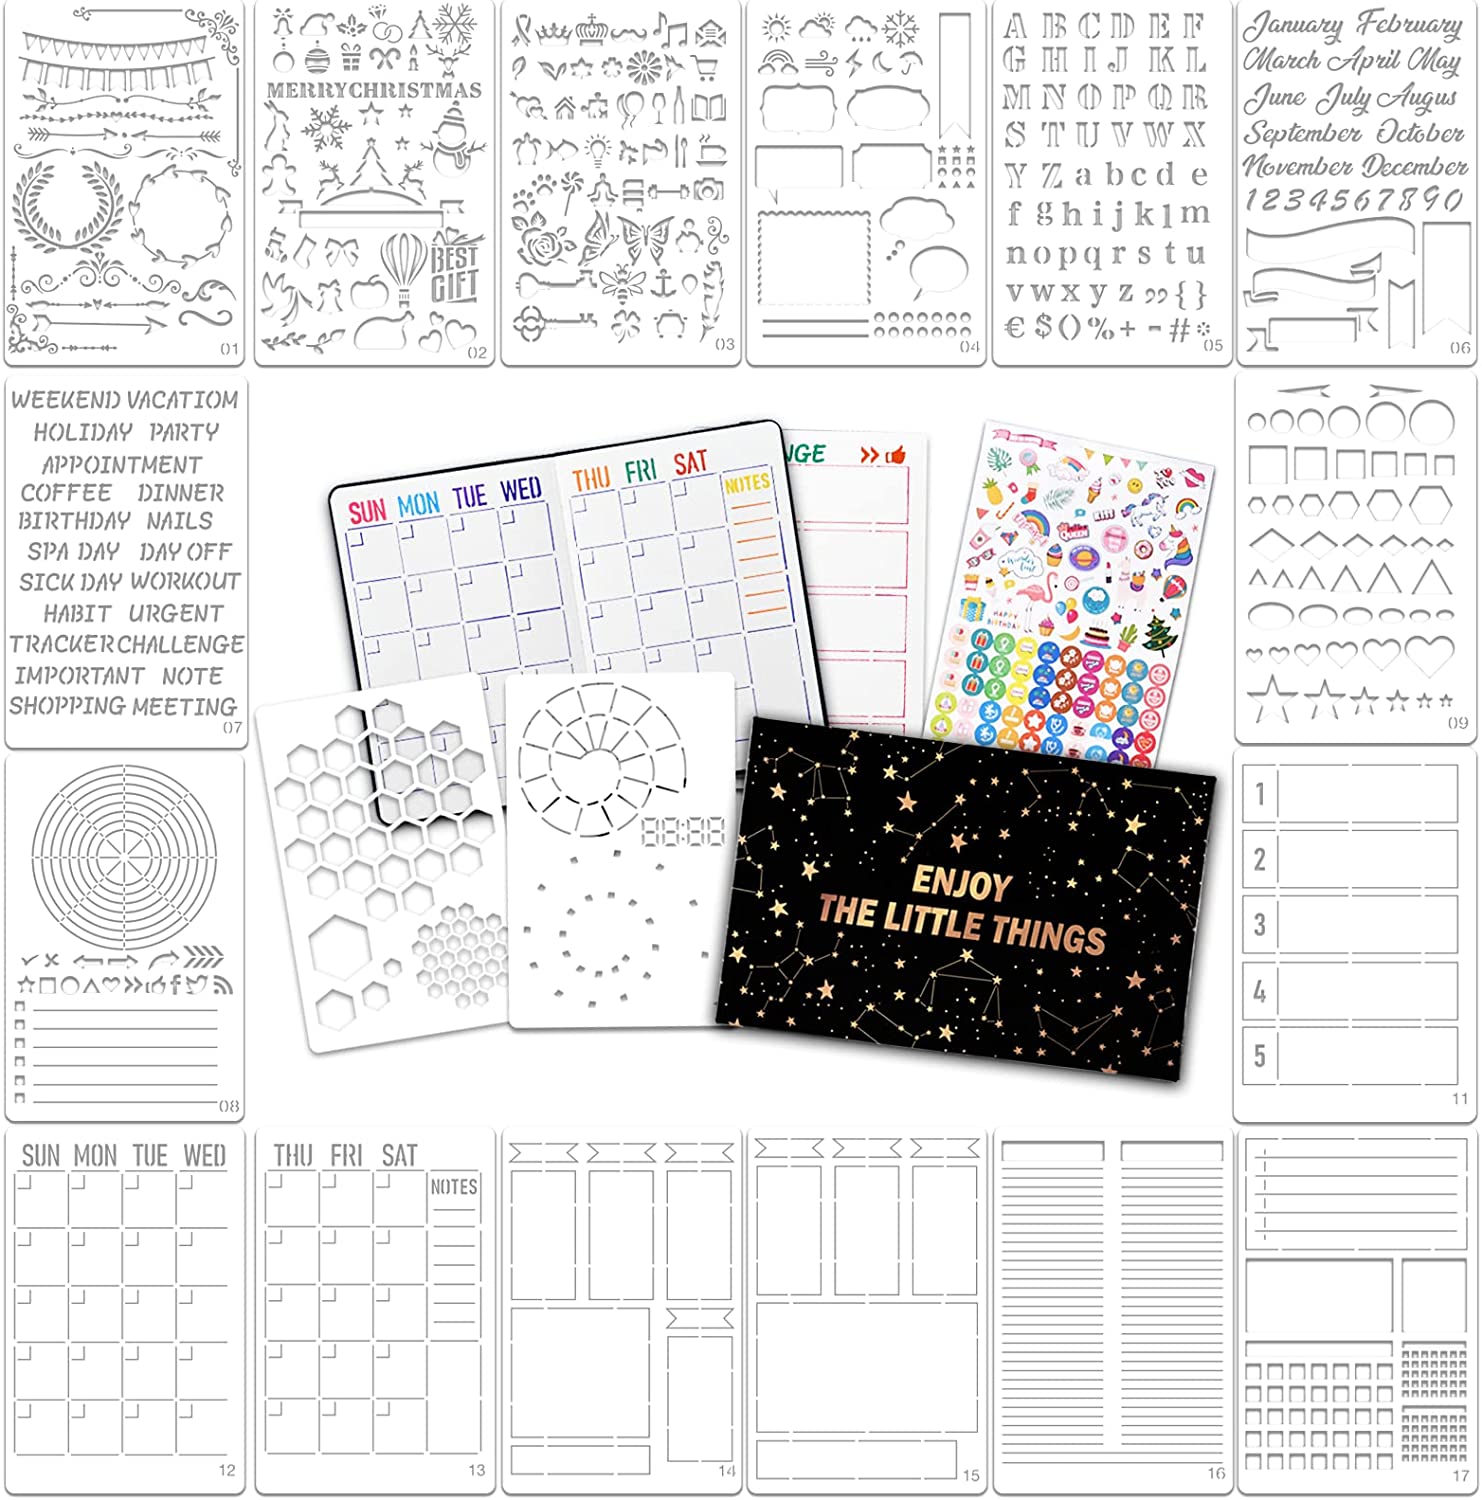 Bullet Dotted Journal Kit, Feela A5 Dotted Bullet Grid Journal Set with 224 Pages Black Notebook, Fineliner Colored Pens, Stencils, Stickers, Washi